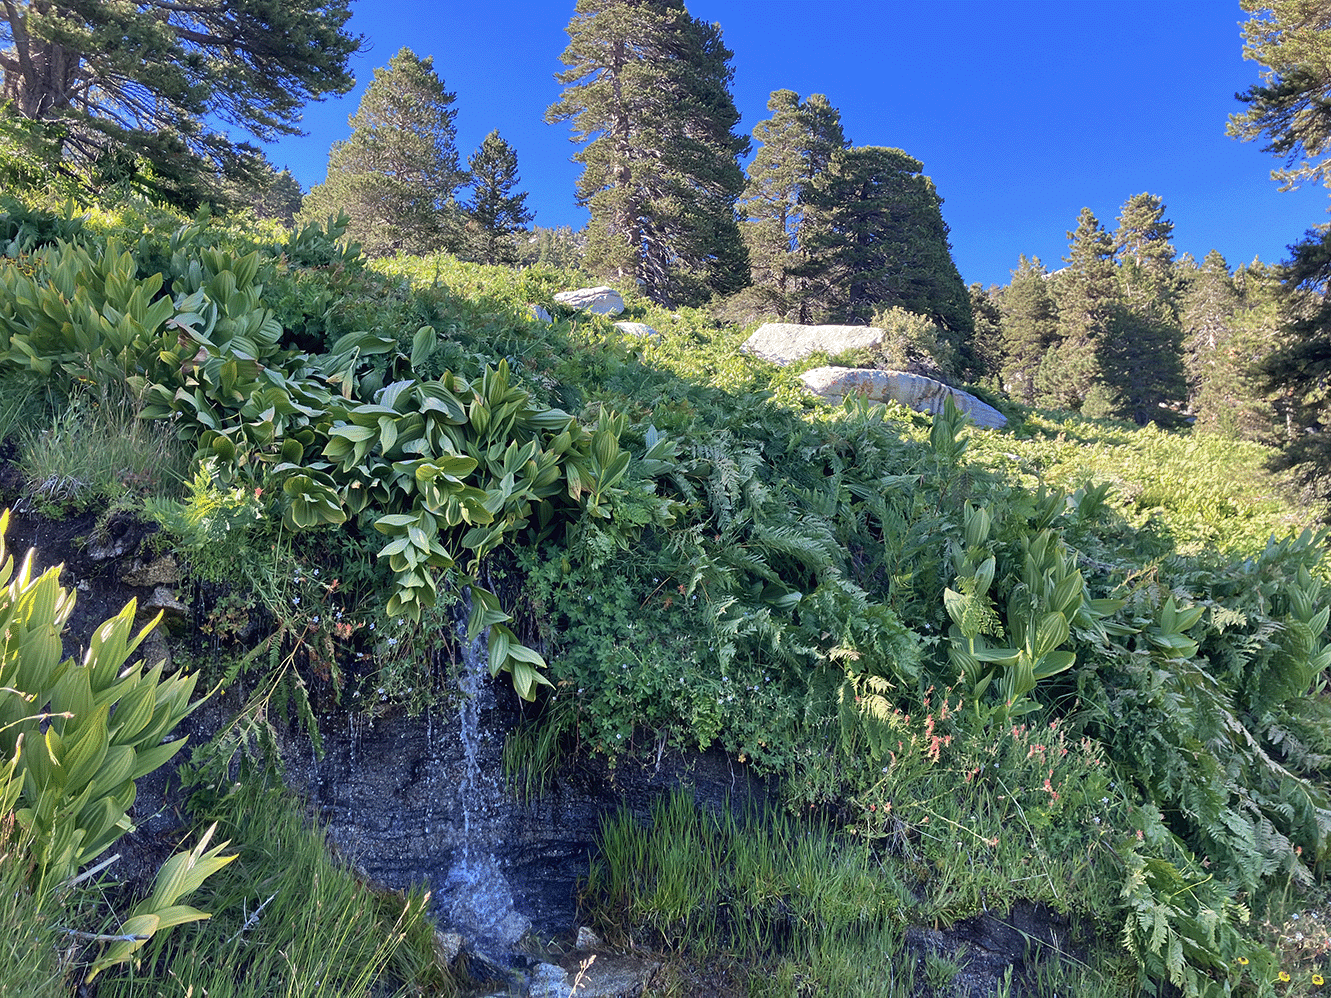 A small snowmelt waterfall on the slopes of Mt. San Jacinto.